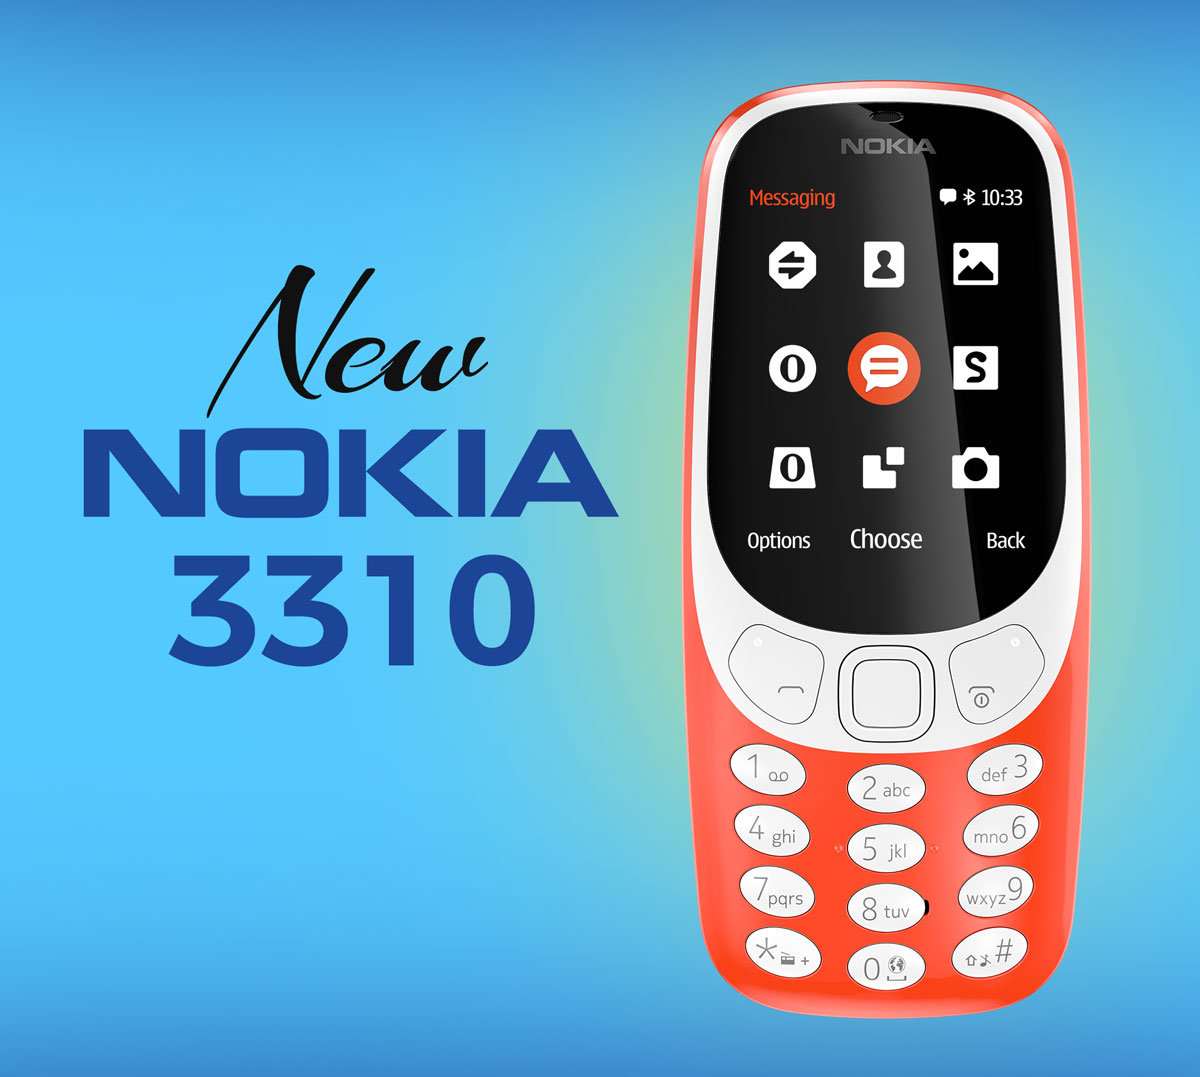 New Nokia 3310 Returning with Classic Look